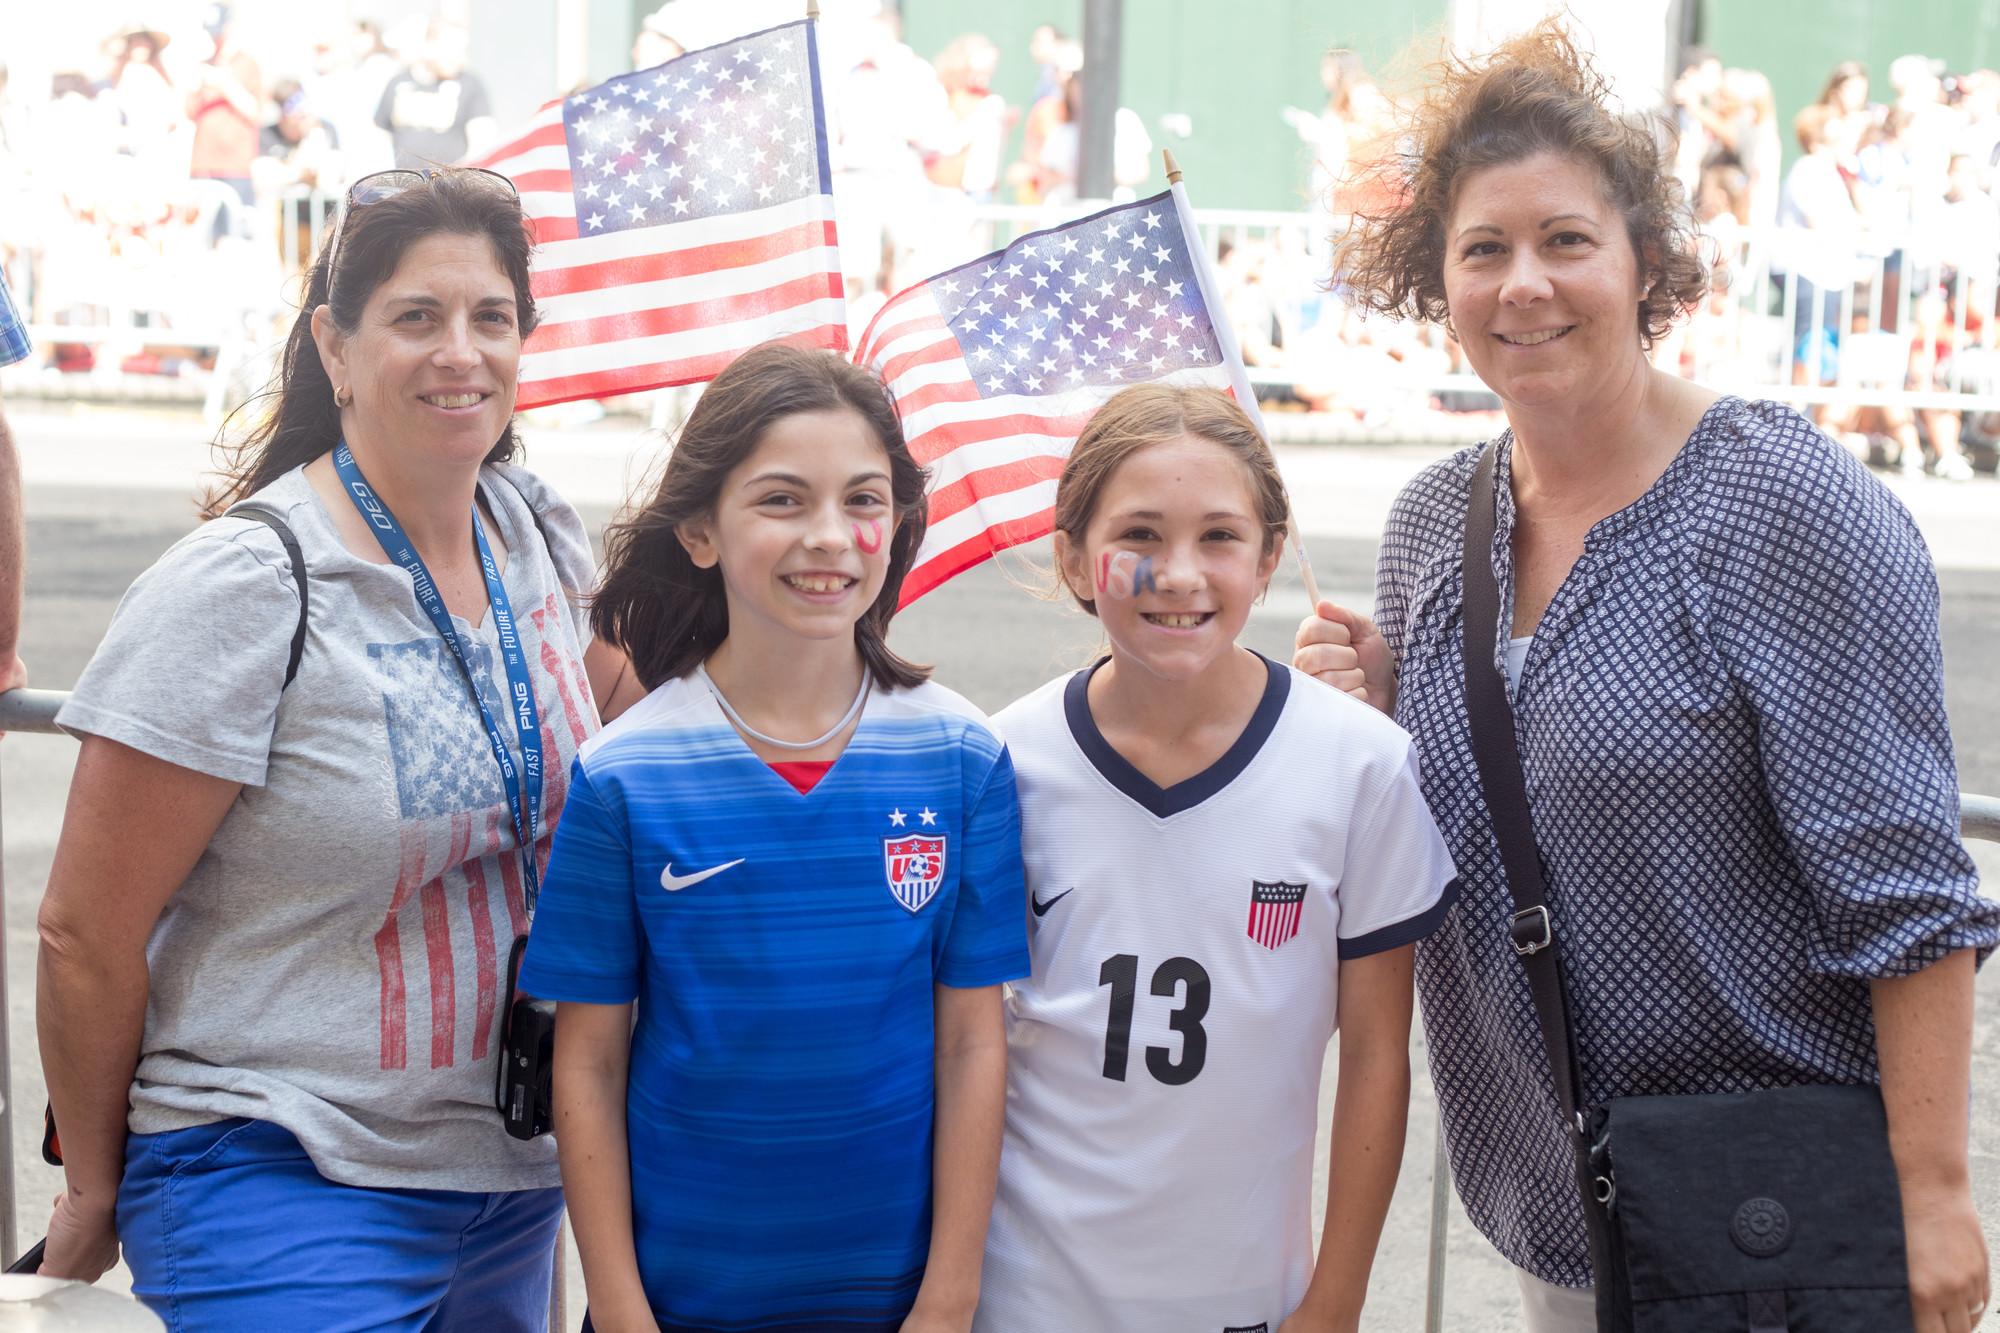 Julie and Marisa Terrone, of Westbury, and Ivan and Oliva Docyk, of Carle Place, didn't miss the opportunity to cheer on American heroes.